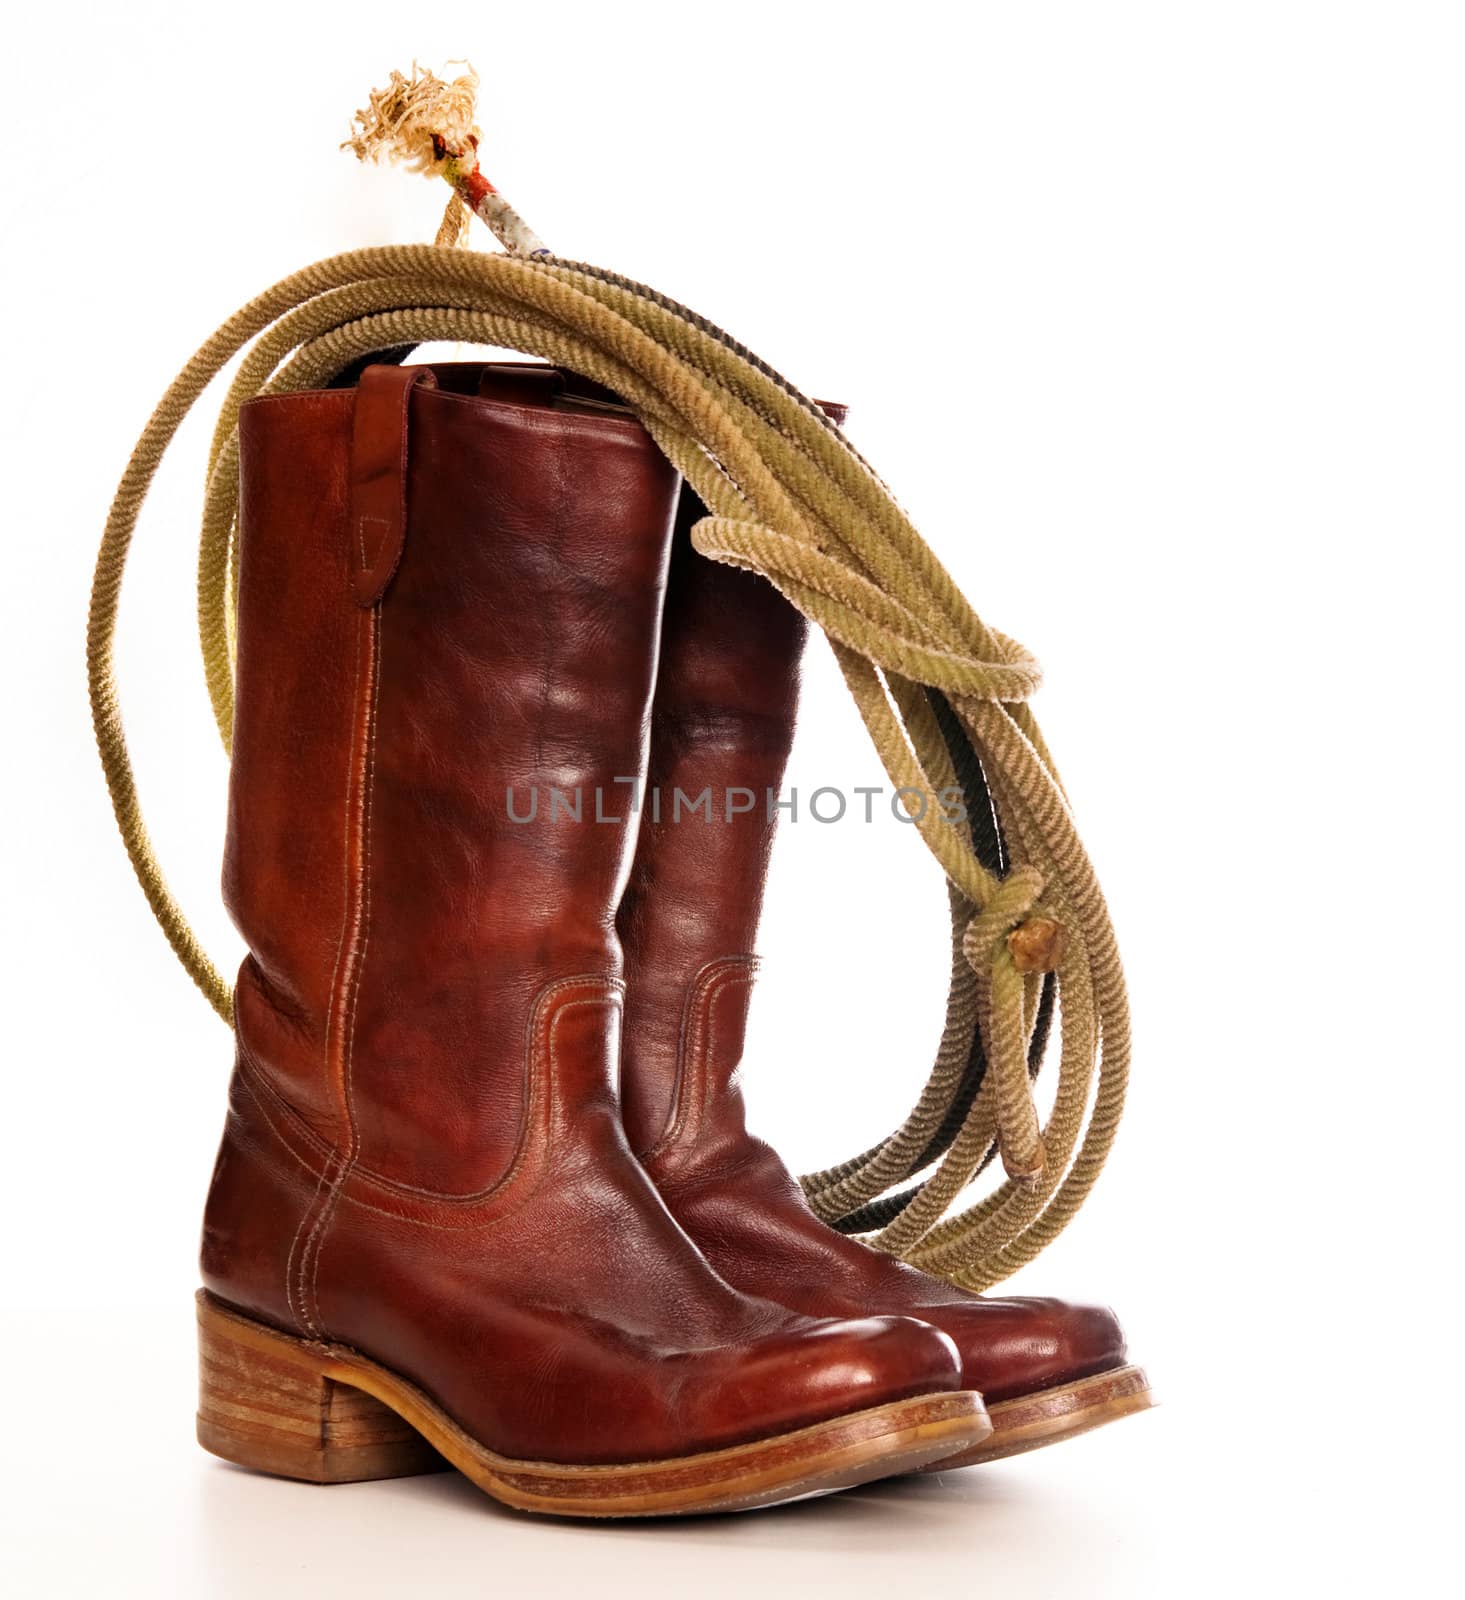 cowboy boots and a Lasso on a white background  by Paulmatthewphoto